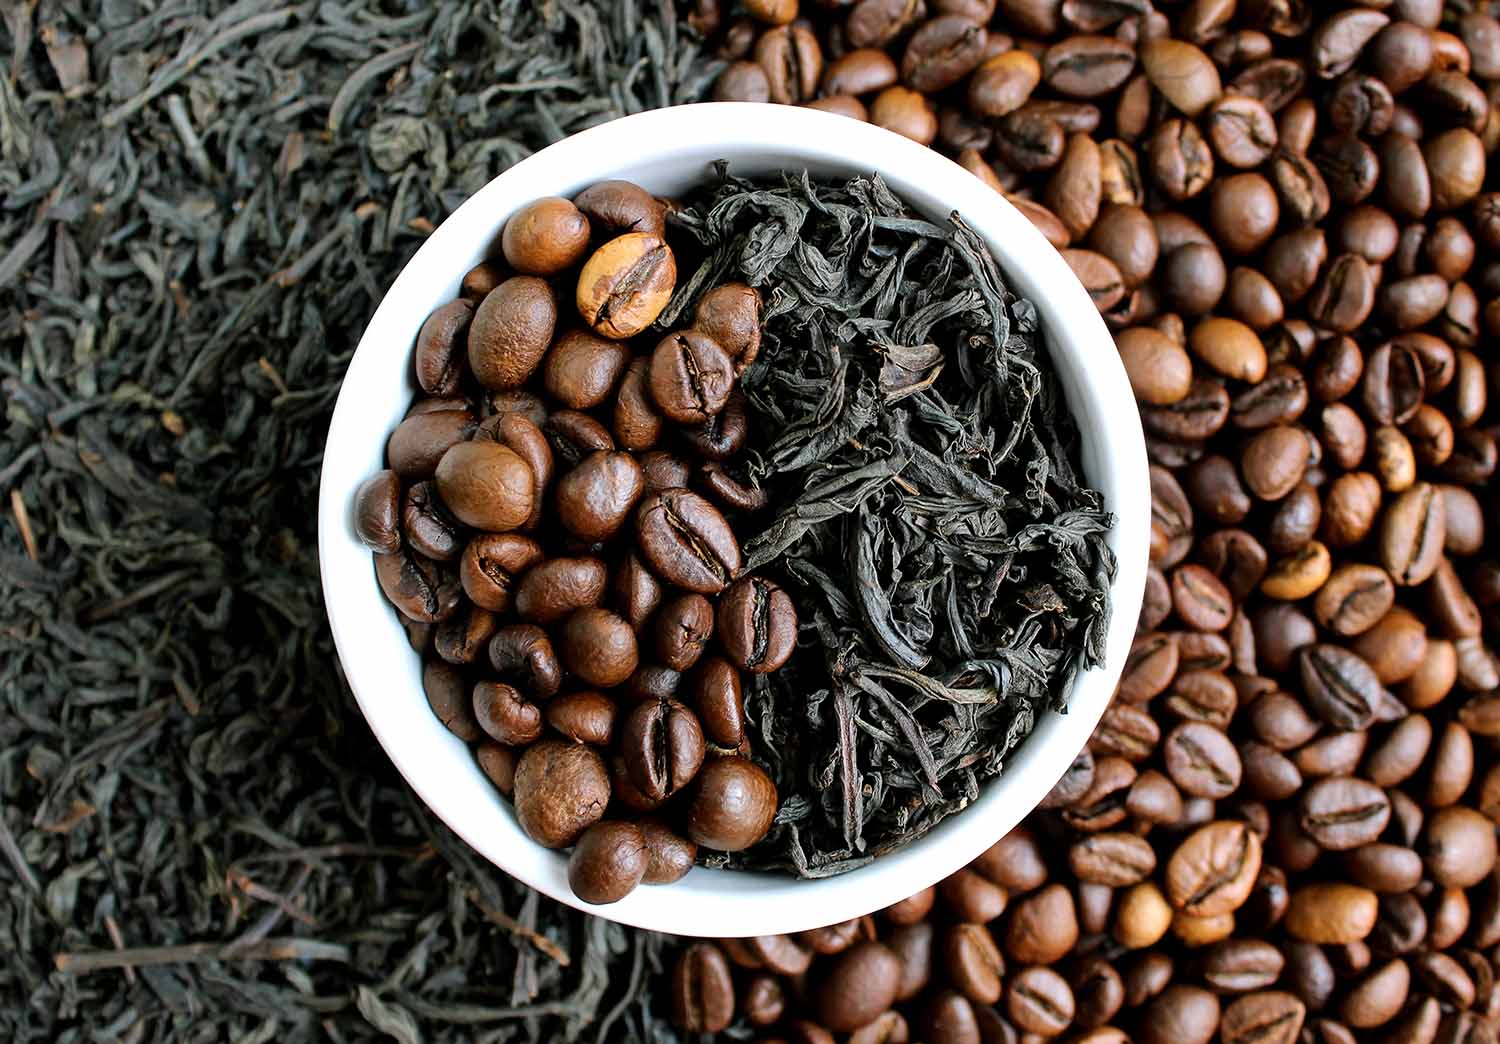 Coffee beans and black tea leaves in a white bowl